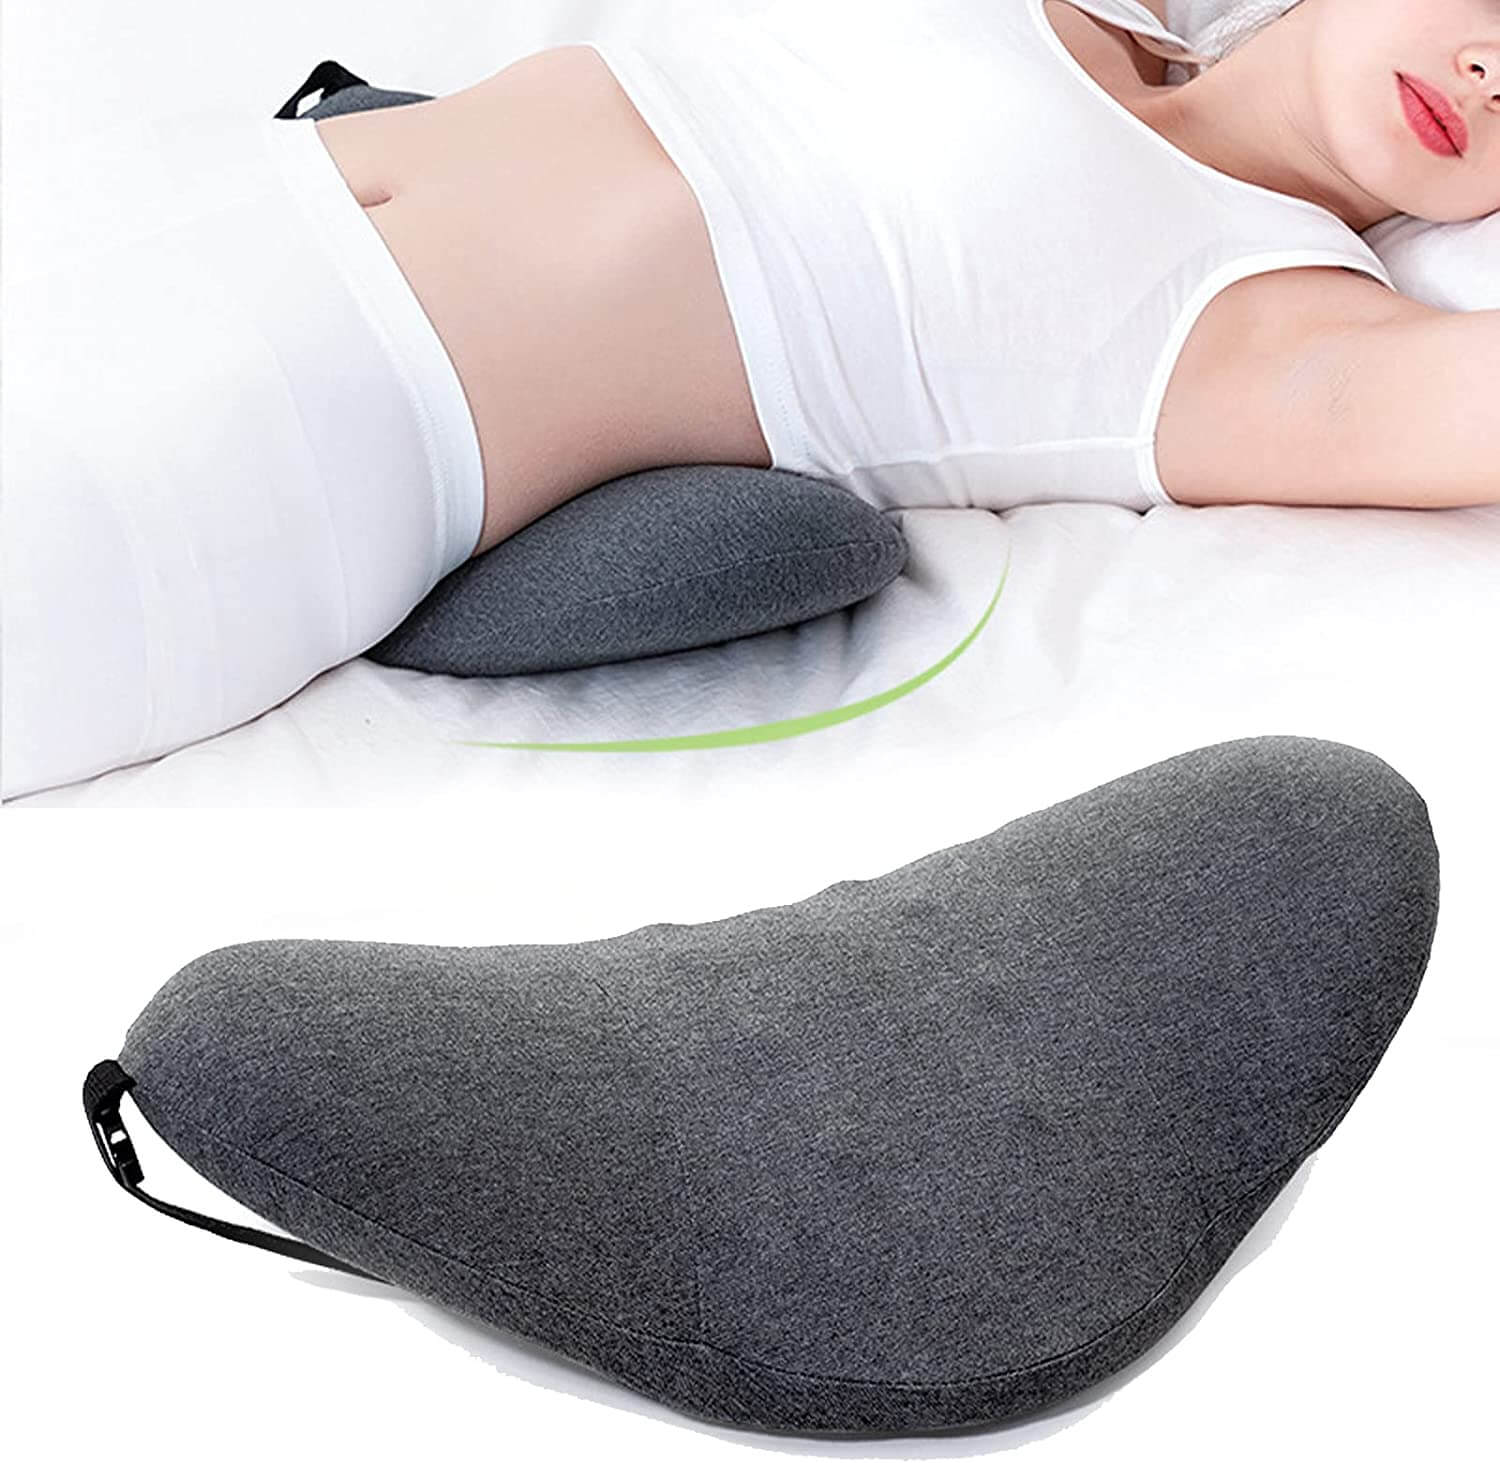 Lumbar Support Pillow For Back On